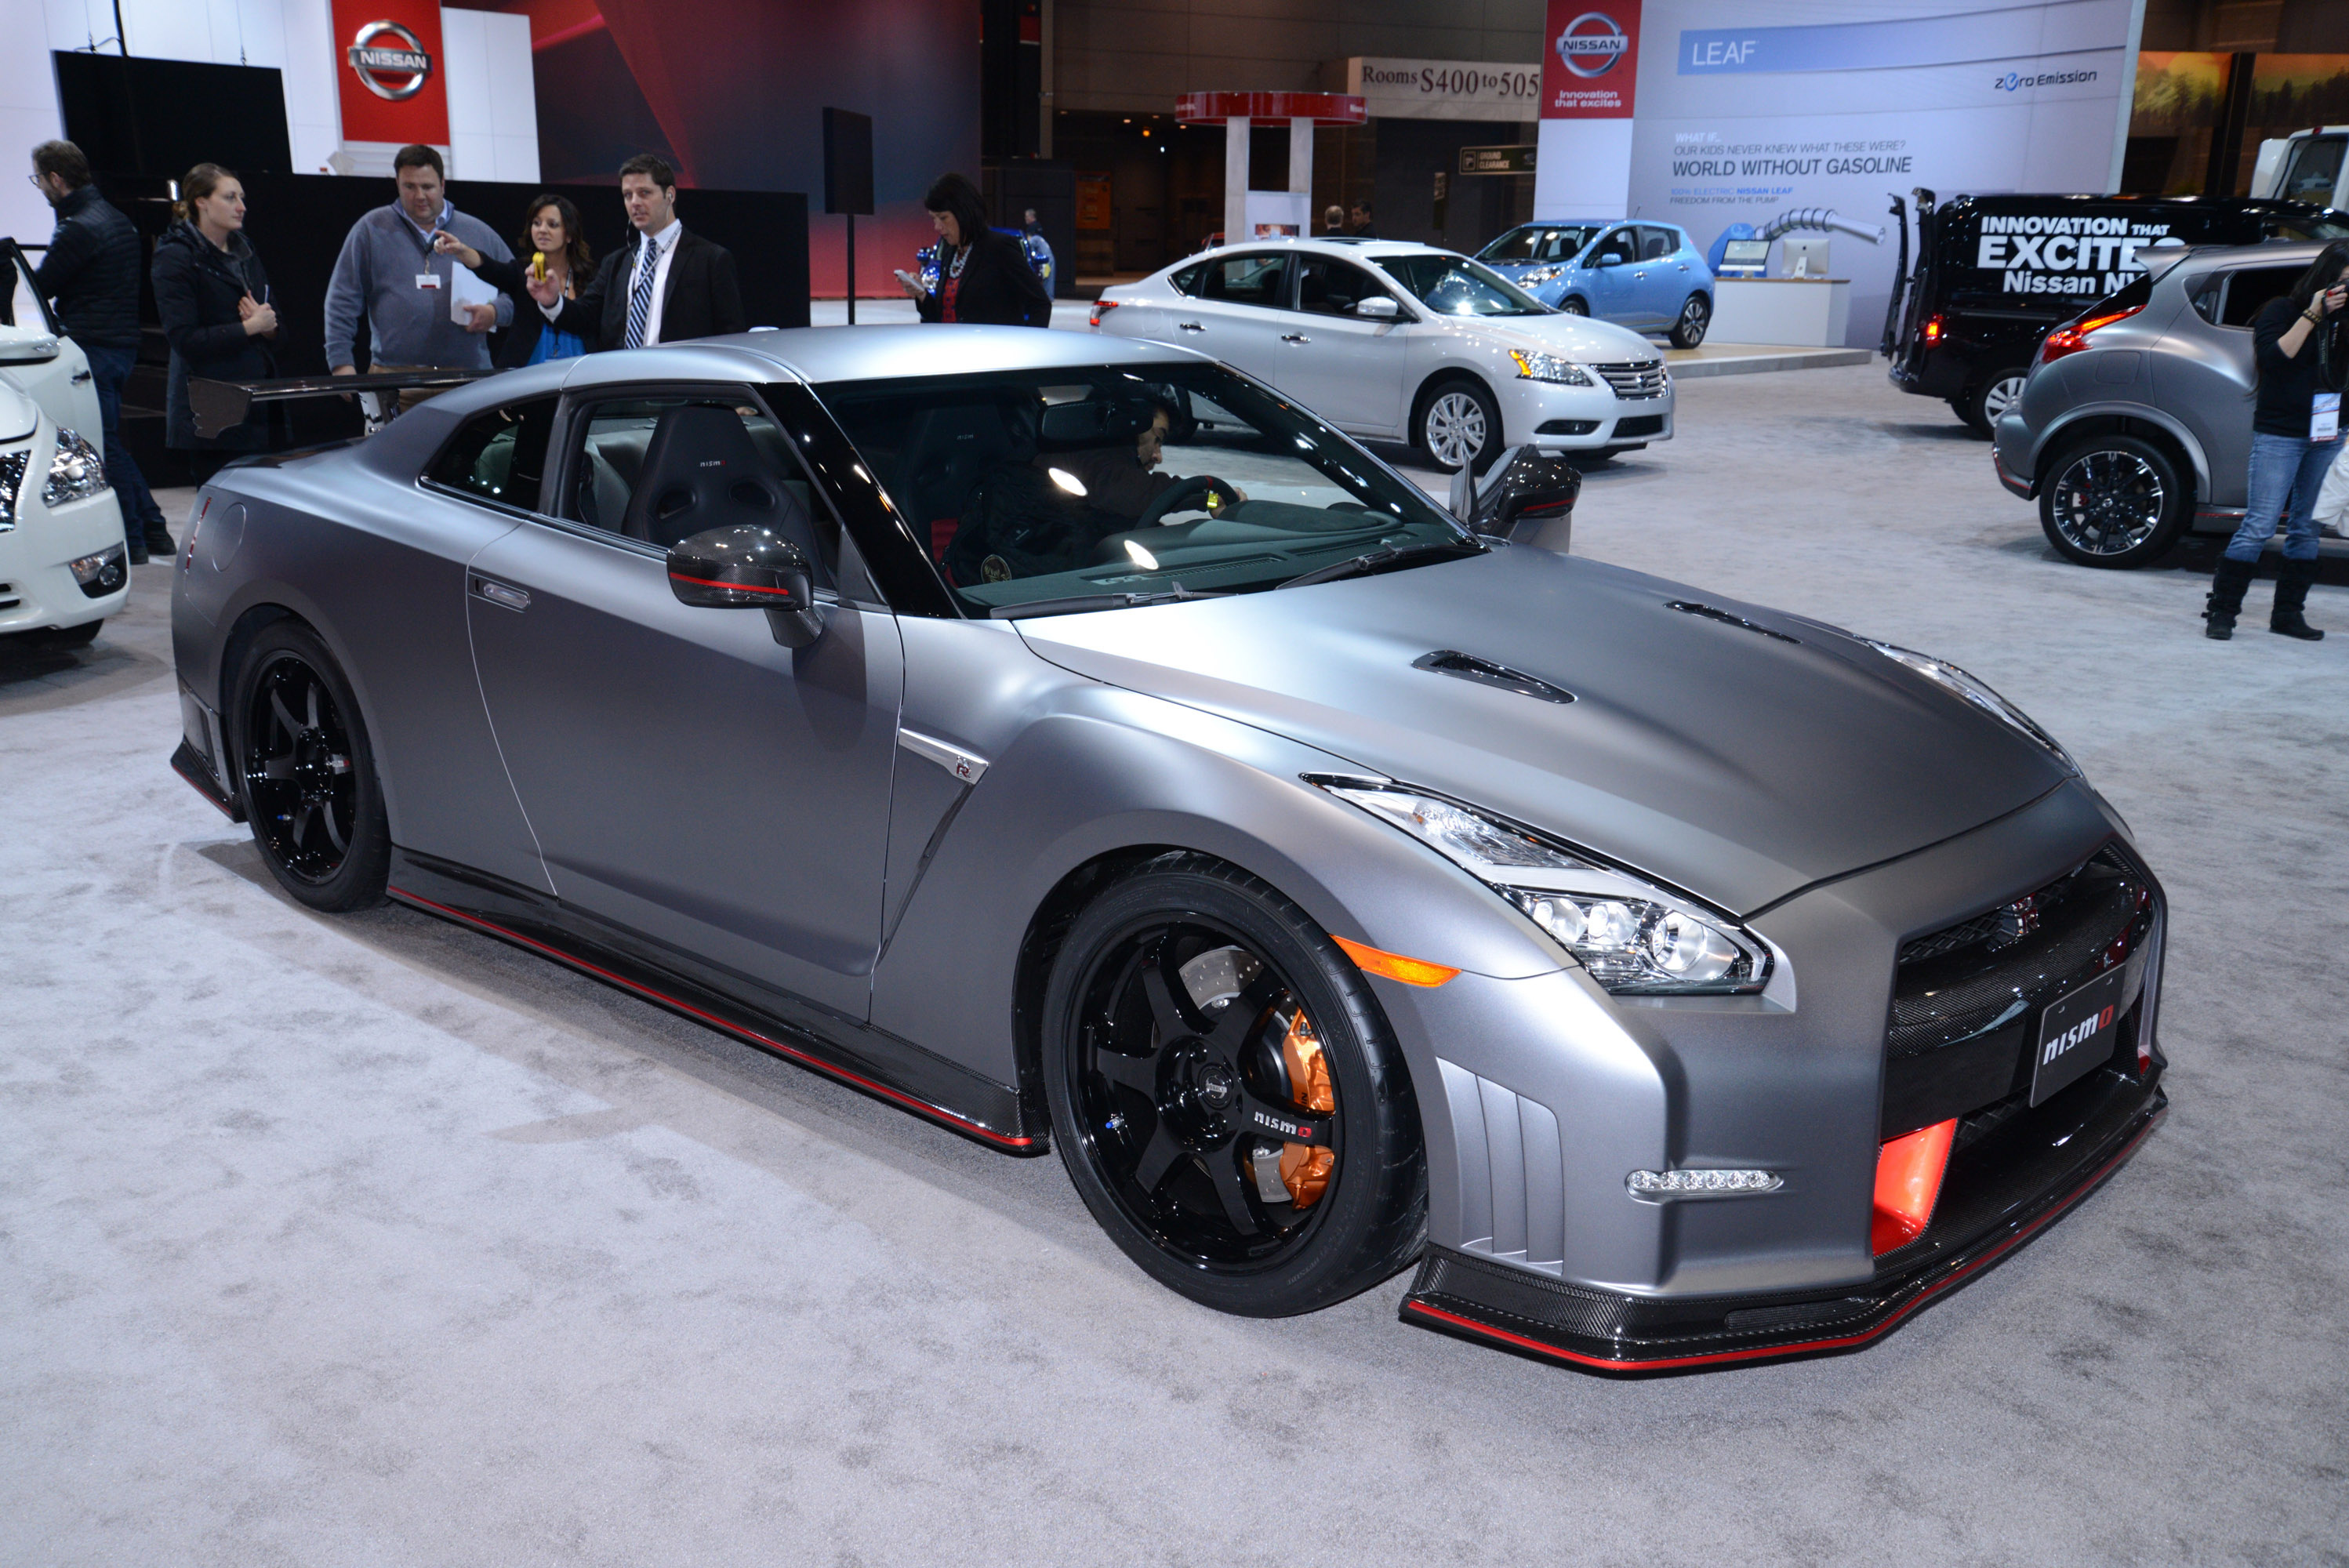 146932 download wallpaper car showroom, nissan, cars, 2014, motor show, chicago, nismo, gt-r, gtr screensavers and pictures for free